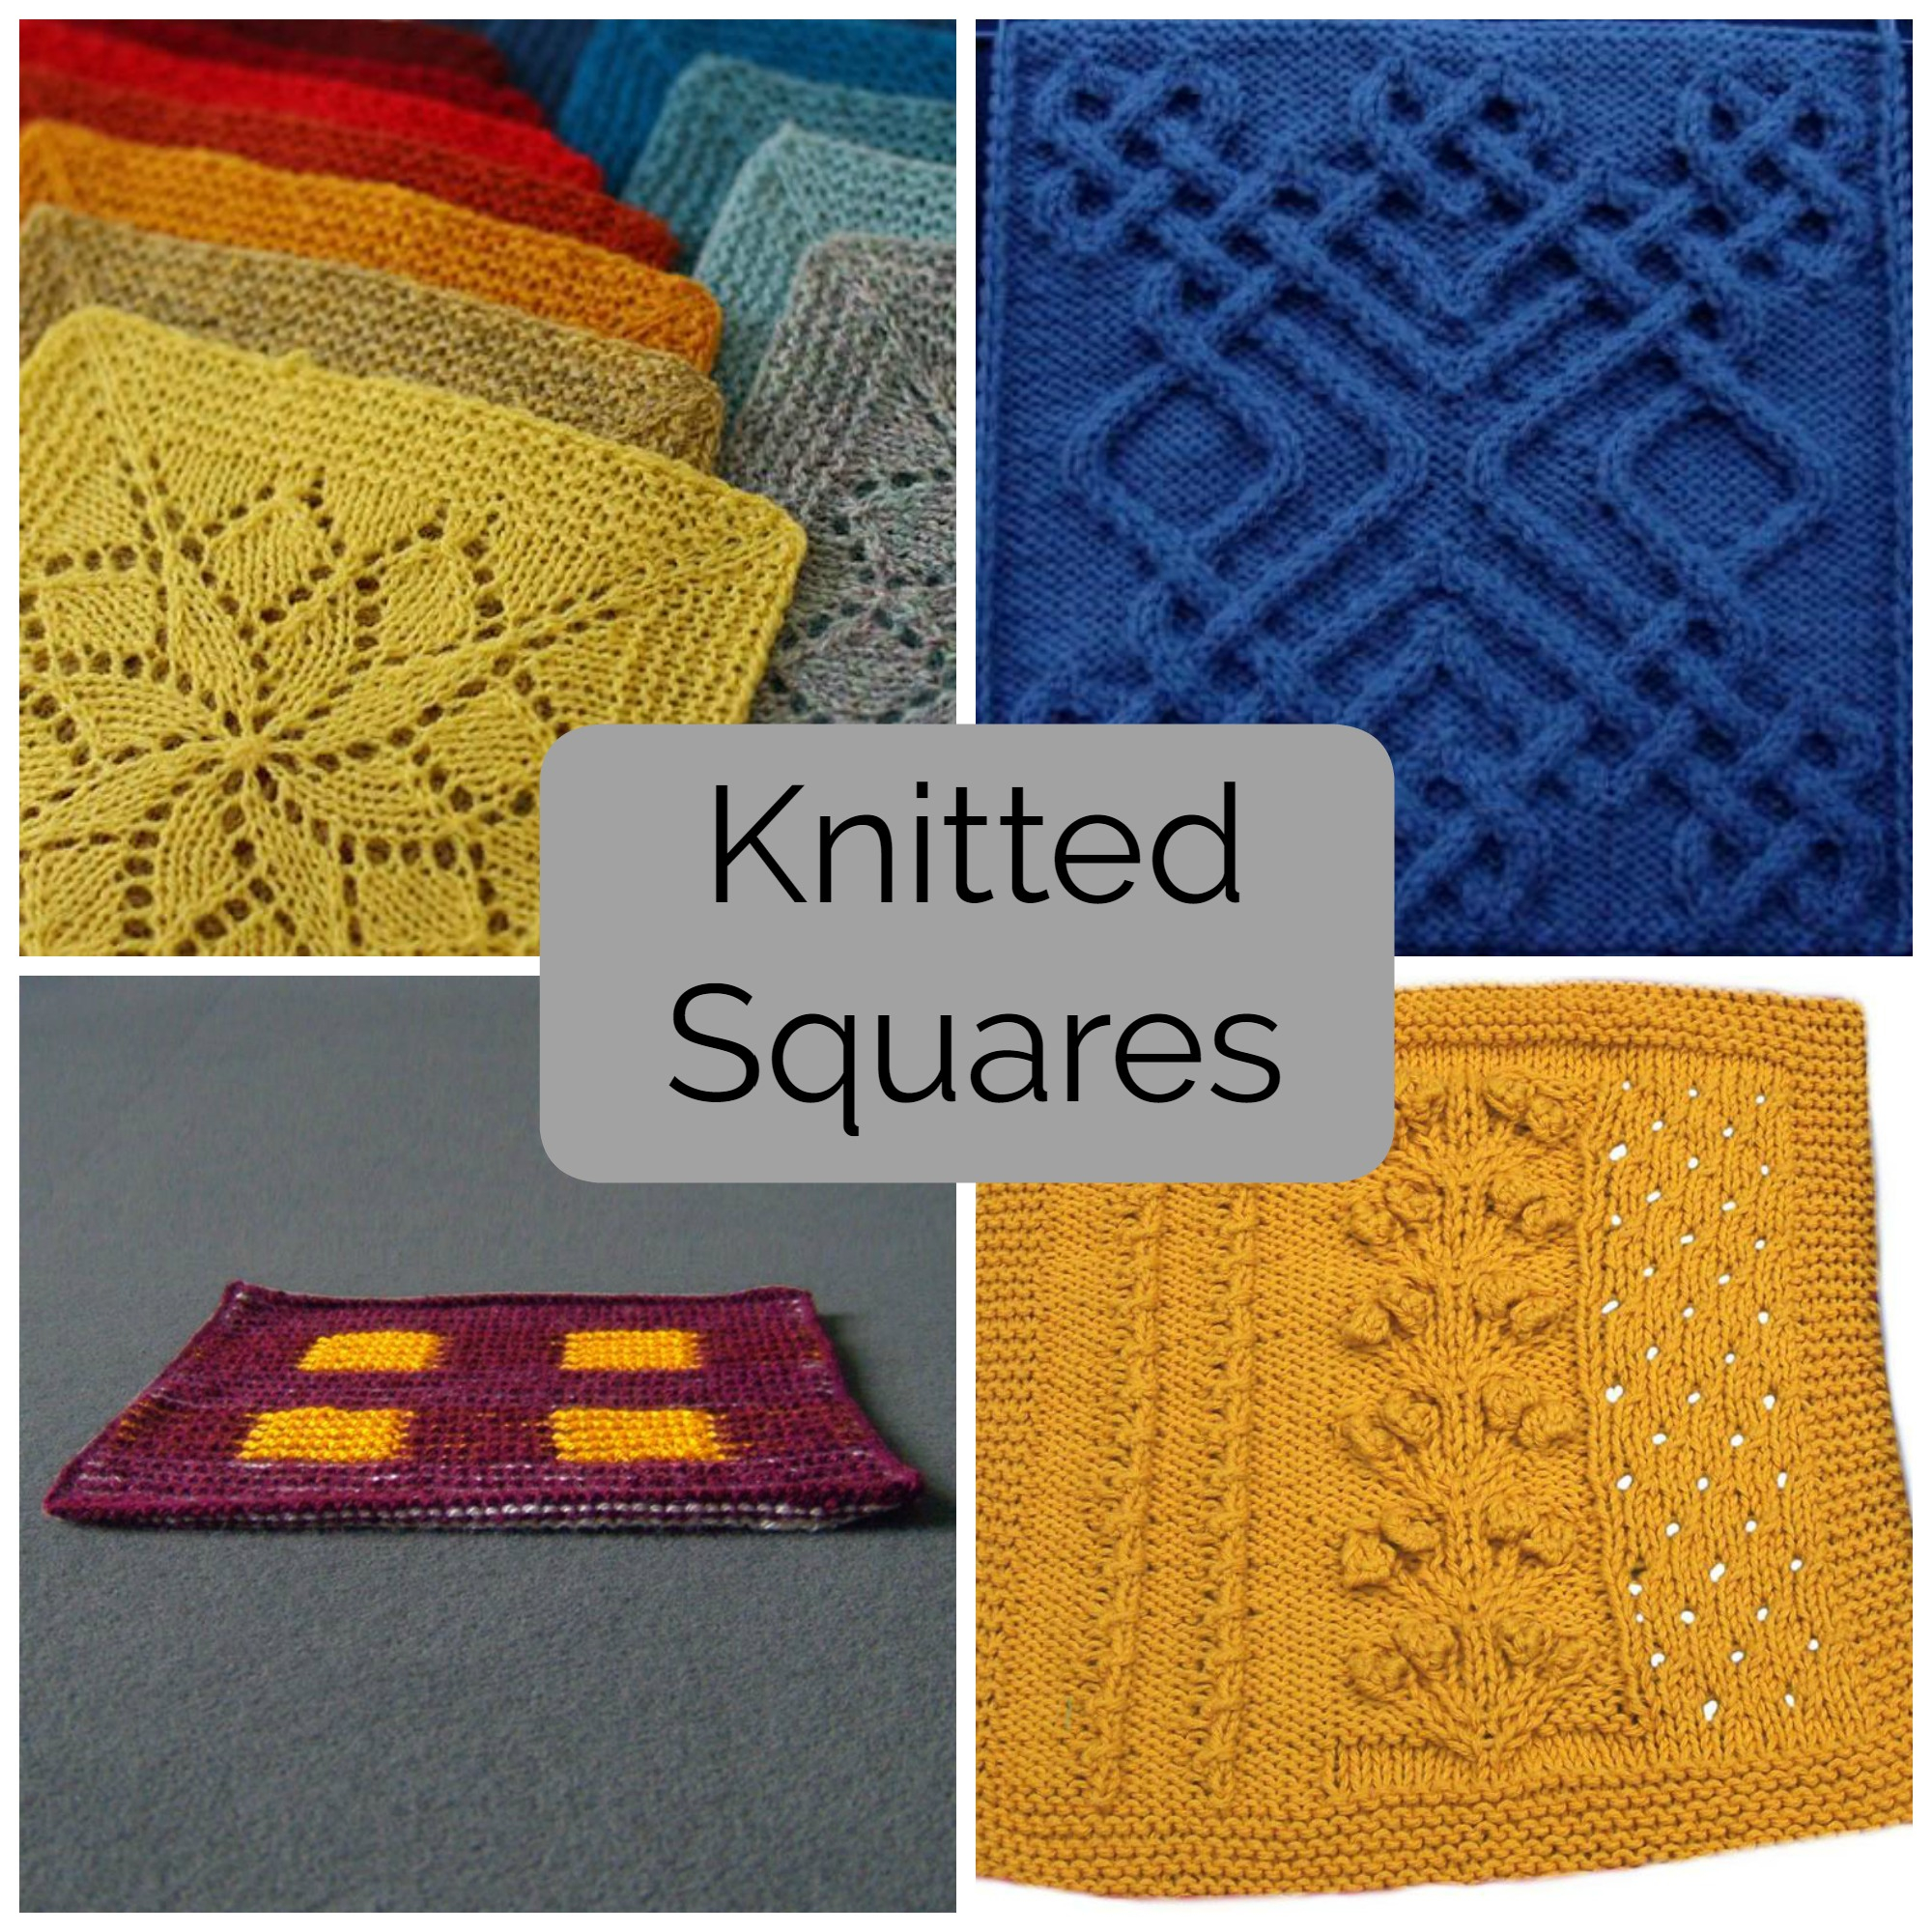 Knitted Quilt Block Patterns Mix And Match These Knitted Squares For Any Project